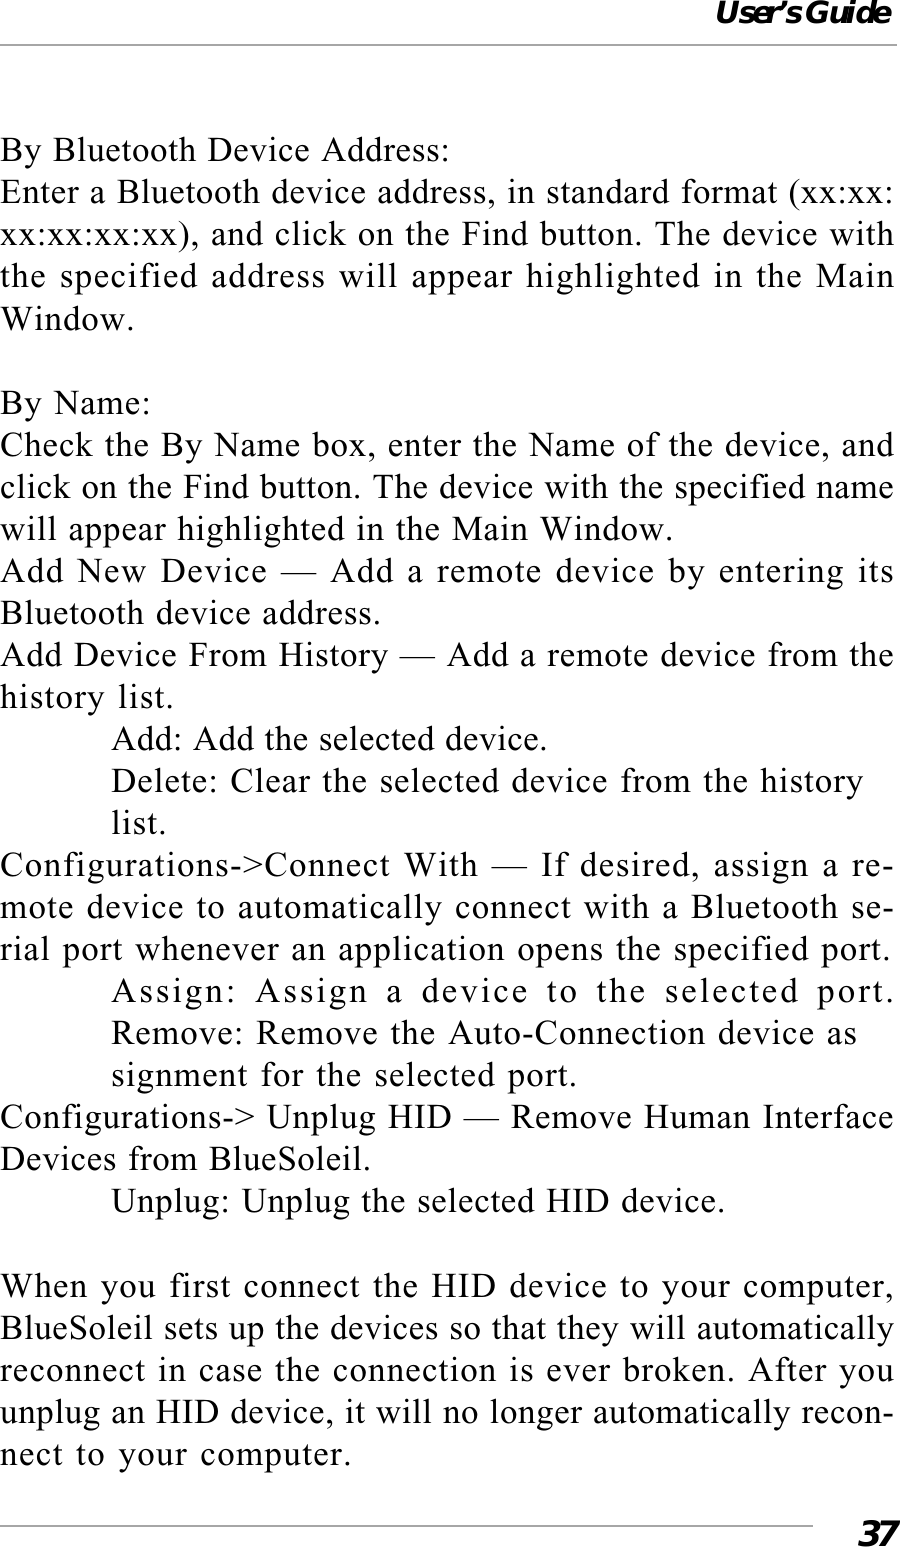 User’s Guide37By Bluetooth Device Address:Enter a Bluetooth device address, in standard format (xx:xx:xx:xx:xx:xx), and click on the Find button. The device withthe specified address will appear highlighted in the MainWindow.By Name:Check the By Name box, enter the Name of the device, andclick on the Find button. The device with the specified namewill appear highlighted in the Main Window.Add New Device — Add a remote device by entering itsBluetooth device address.Add Device From History — Add a remote device from thehistory list.Add: Add the selected device.Delete: Clear the selected device from the historylist.Configurations-&gt;Connect With — If desired, assign a re-mote device to automatically connect with a Bluetooth se-rial port whenever an application opens the specified port.Assign: Assign a device to the selected port.Remove: Remove the Auto-Connection device assignment for the selected port.Configurations-&gt; Unplug HID — Remove Human InterfaceDevices from BlueSoleil.Unplug: Unplug the selected HID device.When you first connect the HID device to your computer,BlueSoleil sets up the devices so that they will automaticallyreconnect in case the connection is ever broken. After youunplug an HID device, it will no longer automatically recon-nect to your computer.